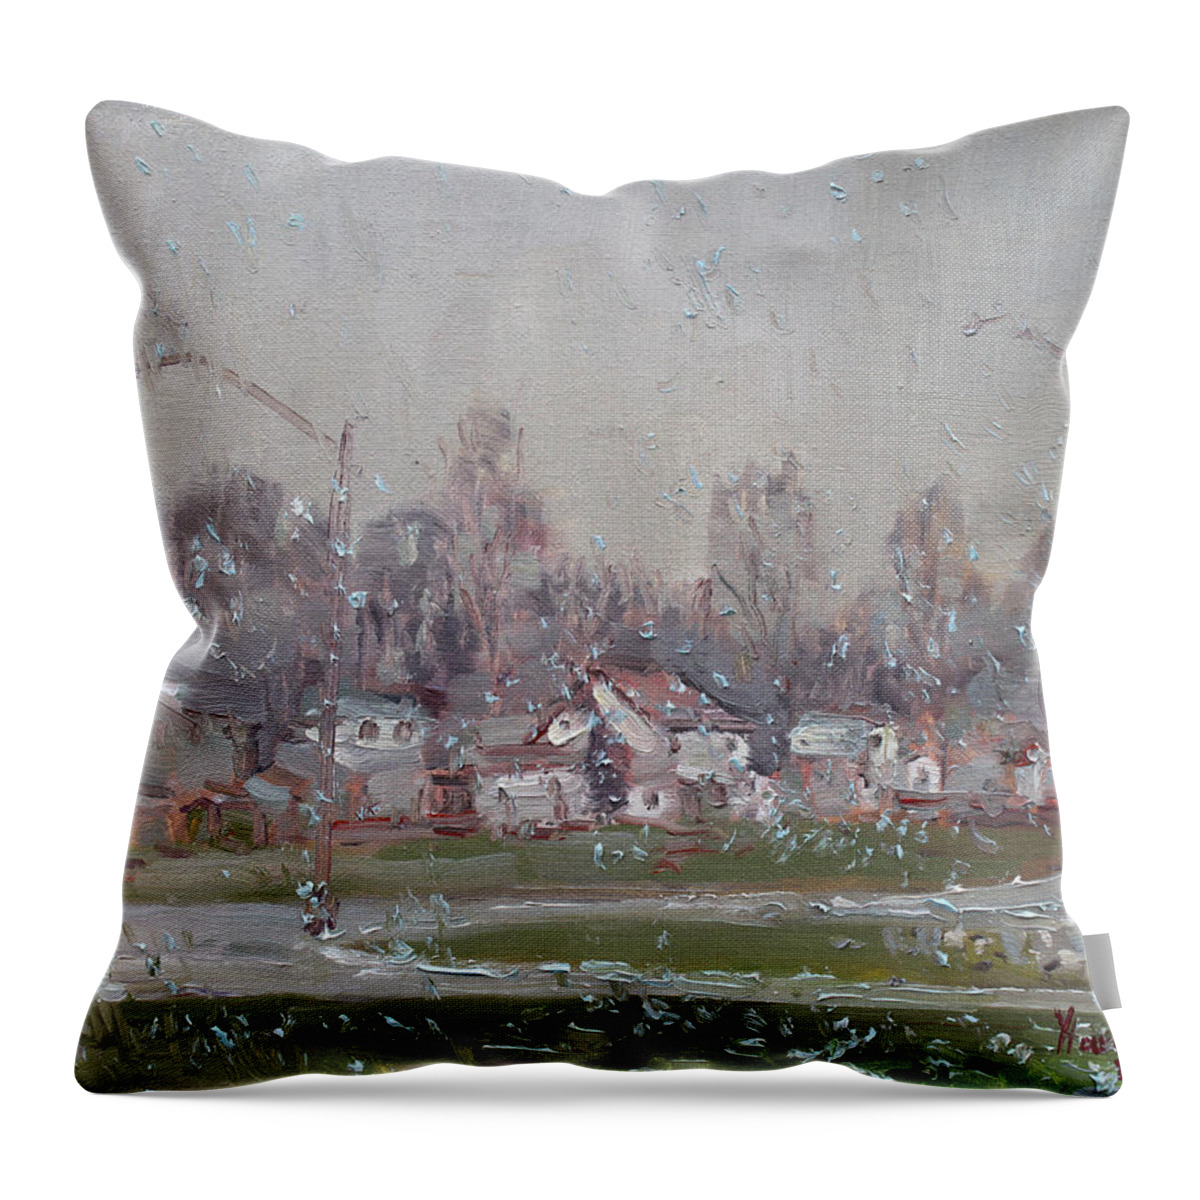 First Snowflakes Throw Pillow featuring the painting The First Snowflakes of the Season by Ylli Haruni